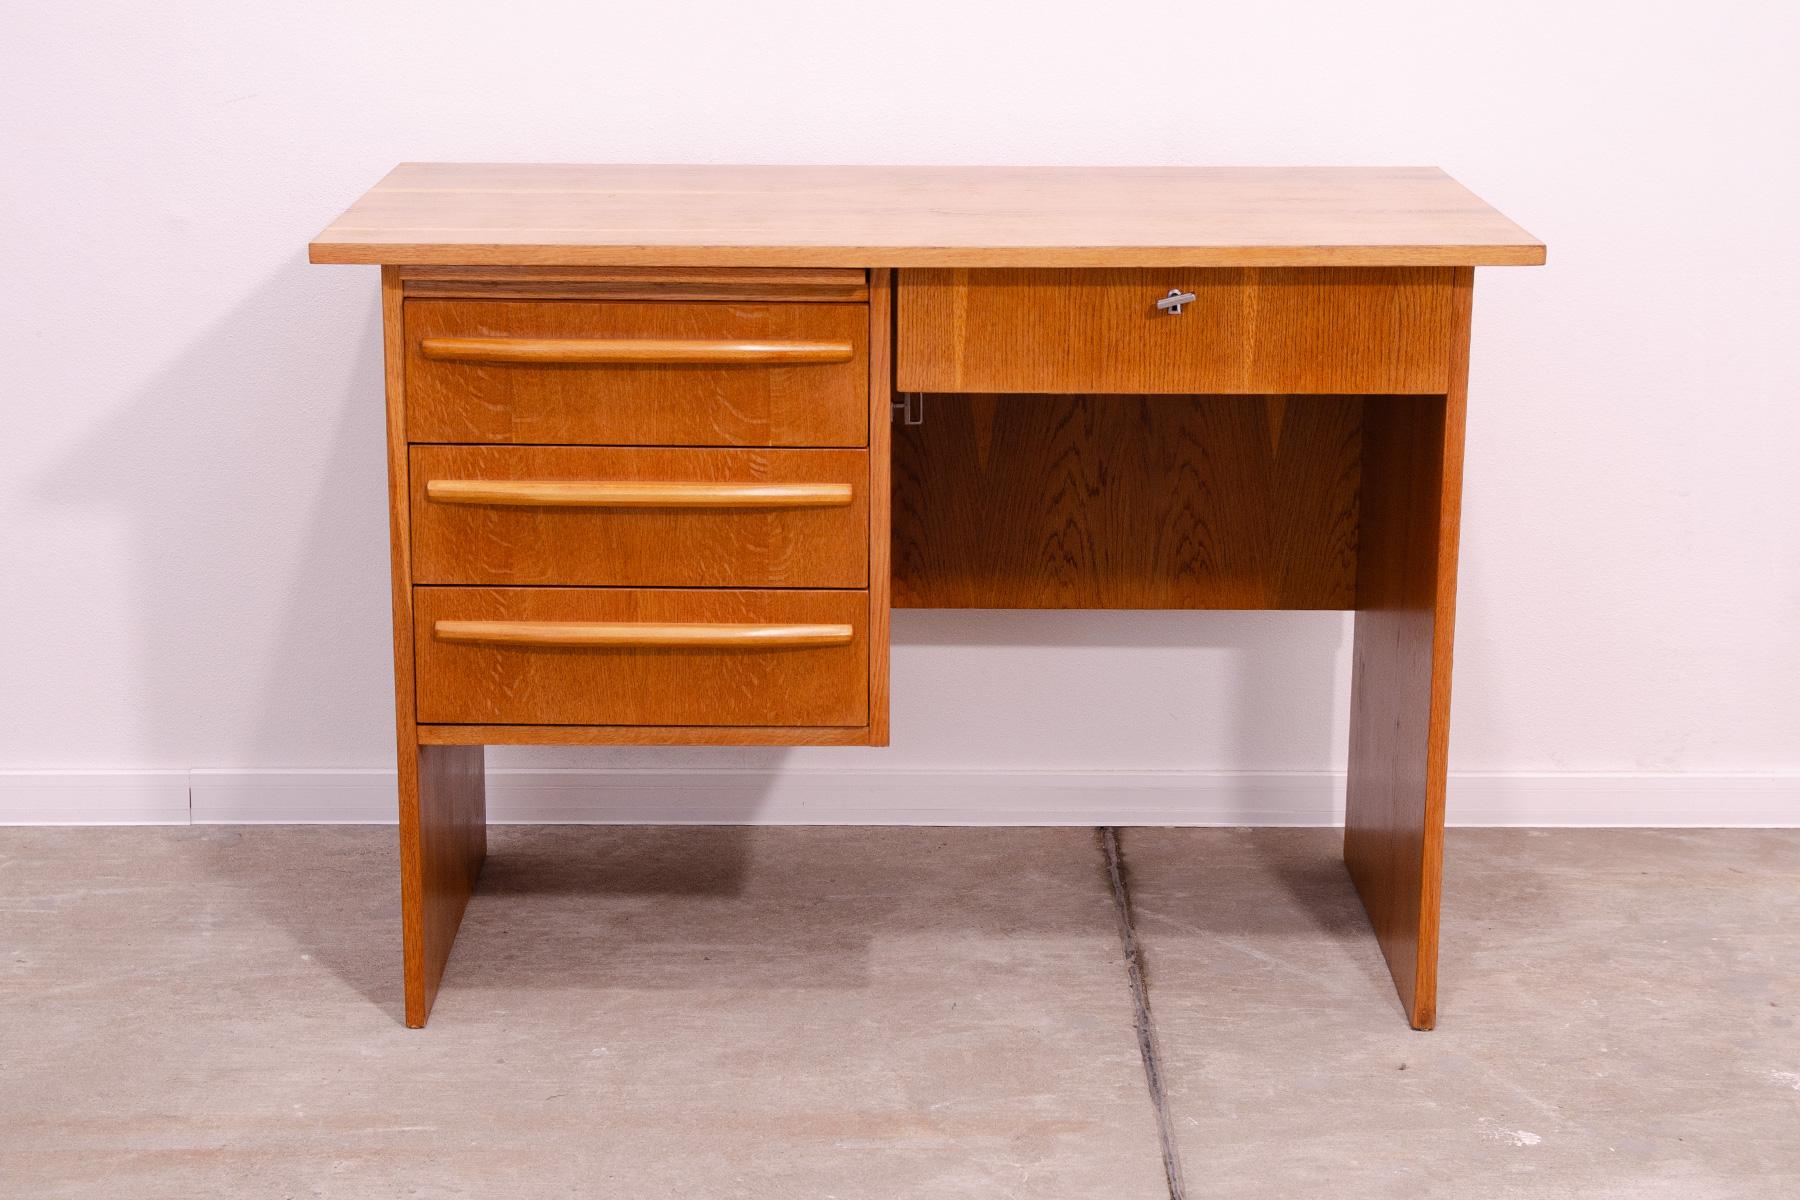 This writing desk was made in the former Czechoslovakia in the 1970´s.

It´s made of beech wood with plastic interiors of the drawers.

Very simple design.  In excellent condition, completely renovated.

Dimensions:

Length: 110 cm, Height: 77 cm,